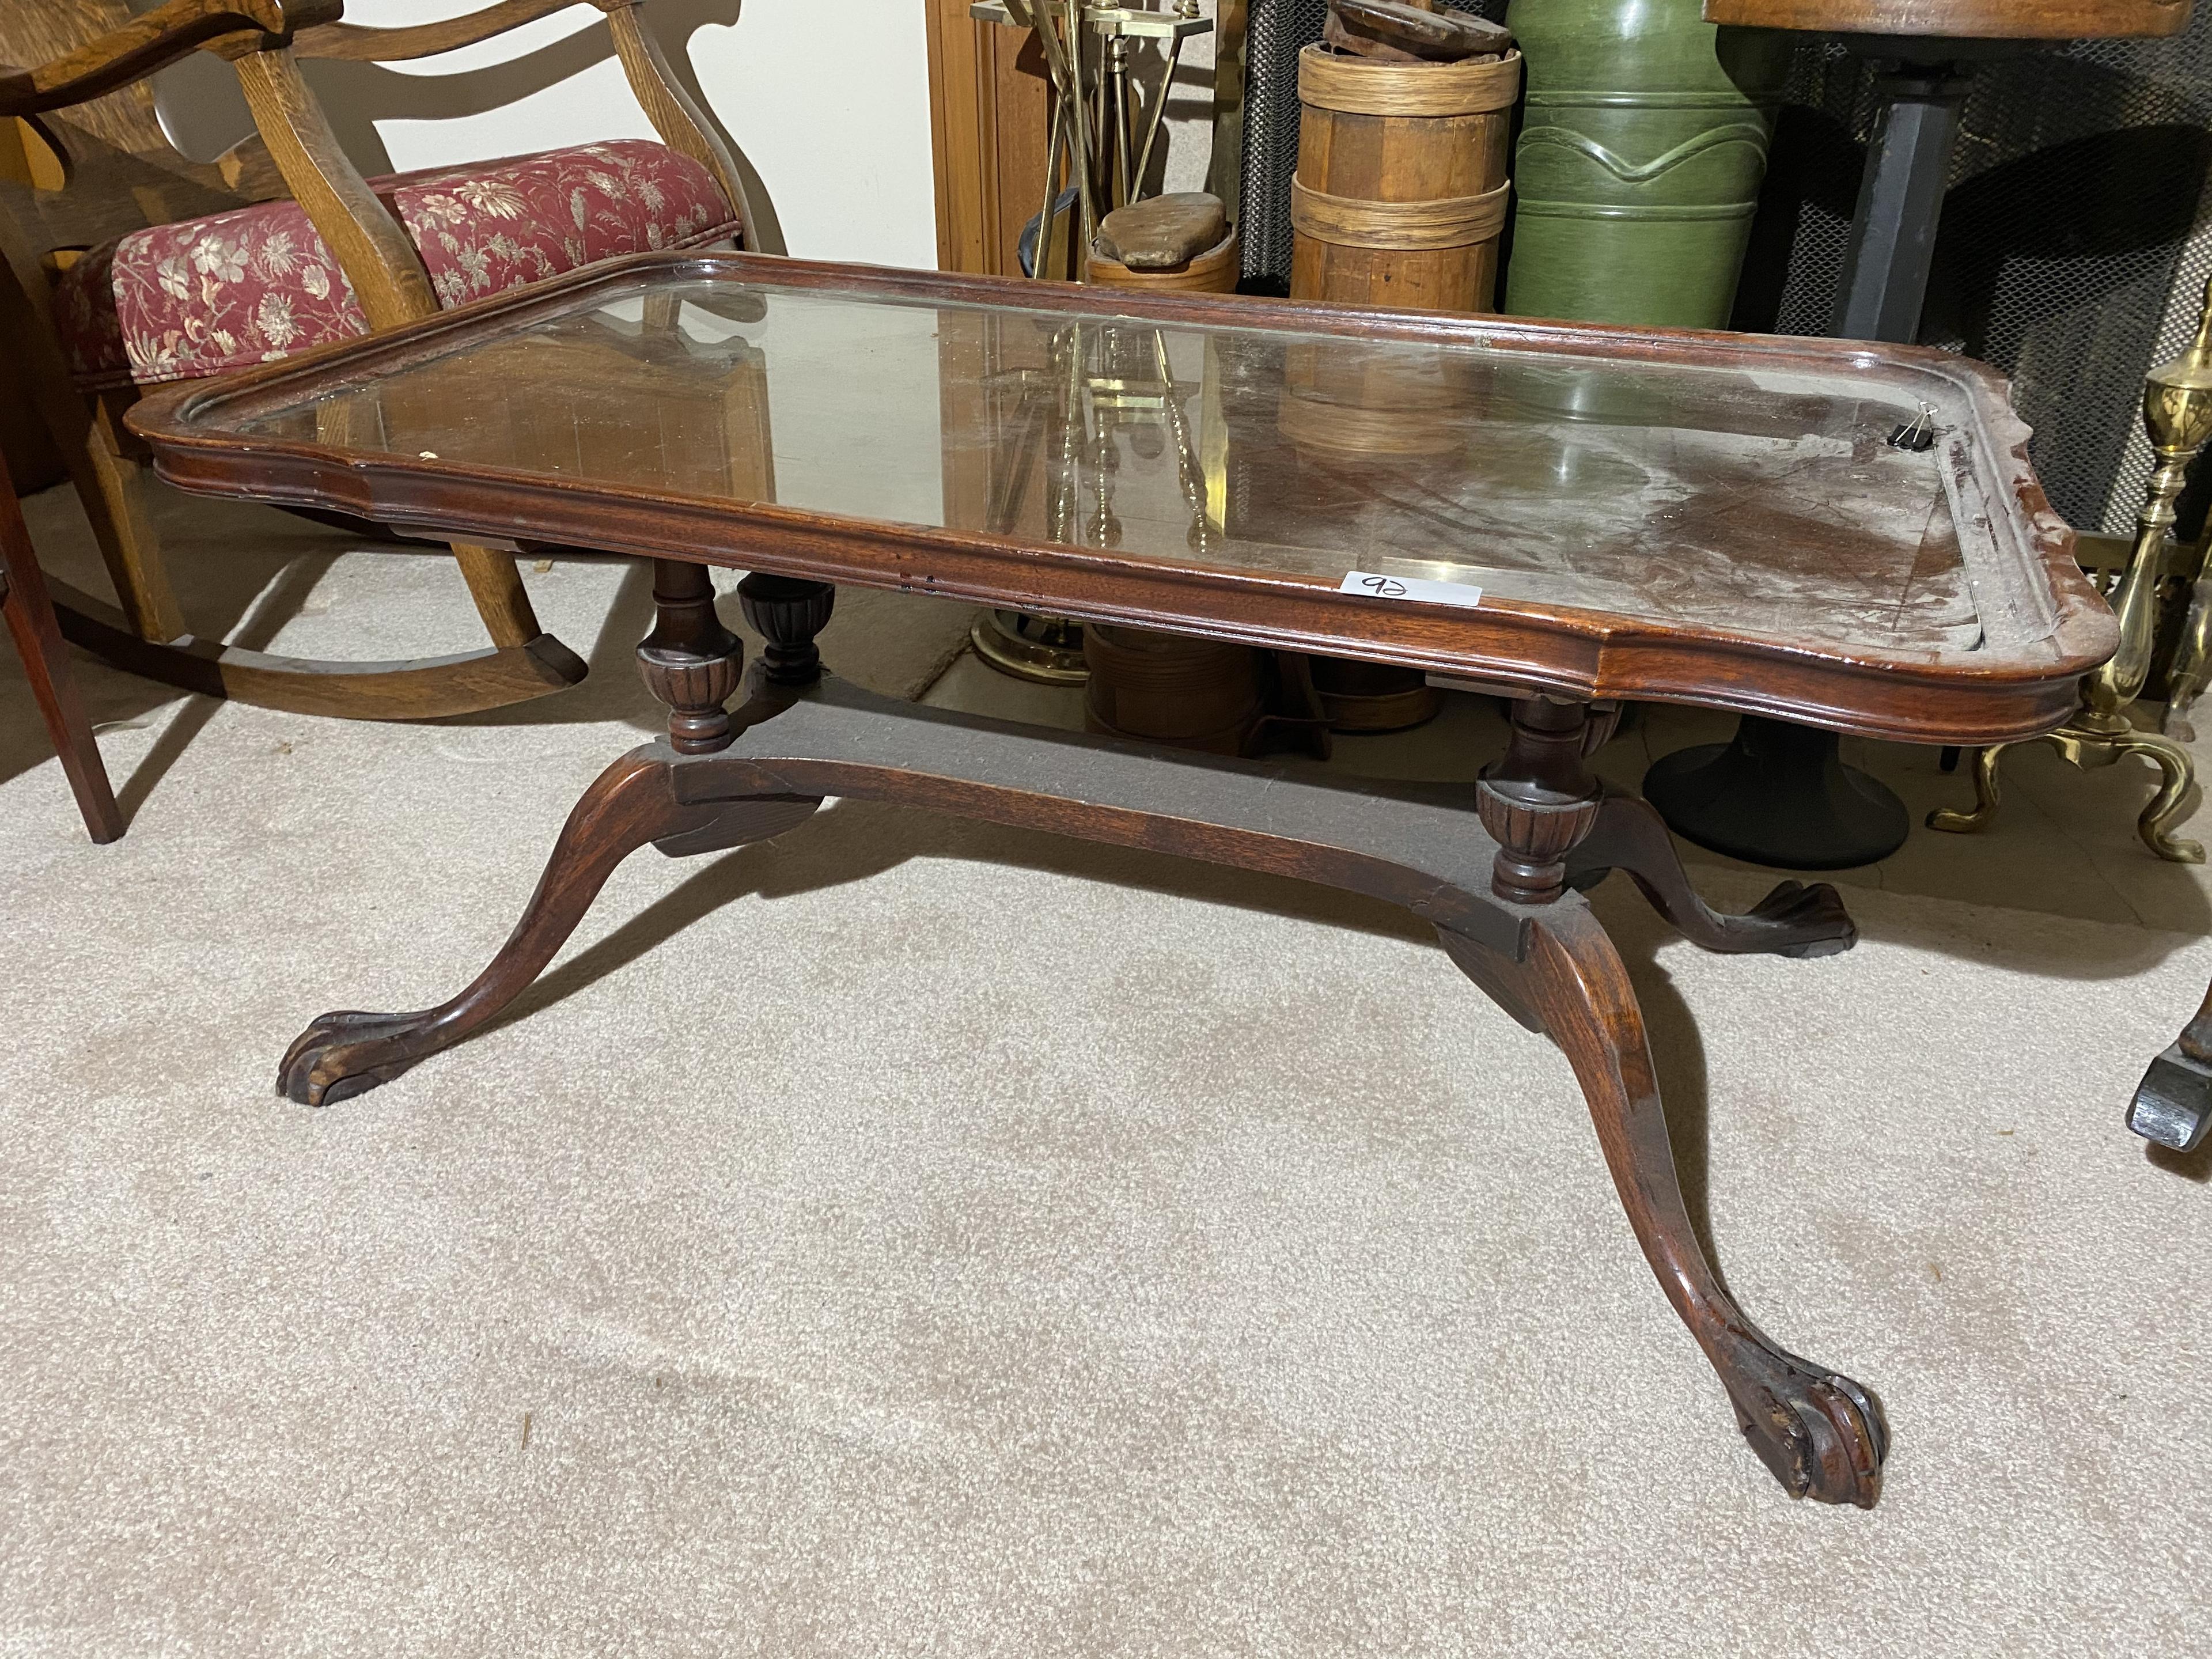 Vintage Paw Foot Coffee Table